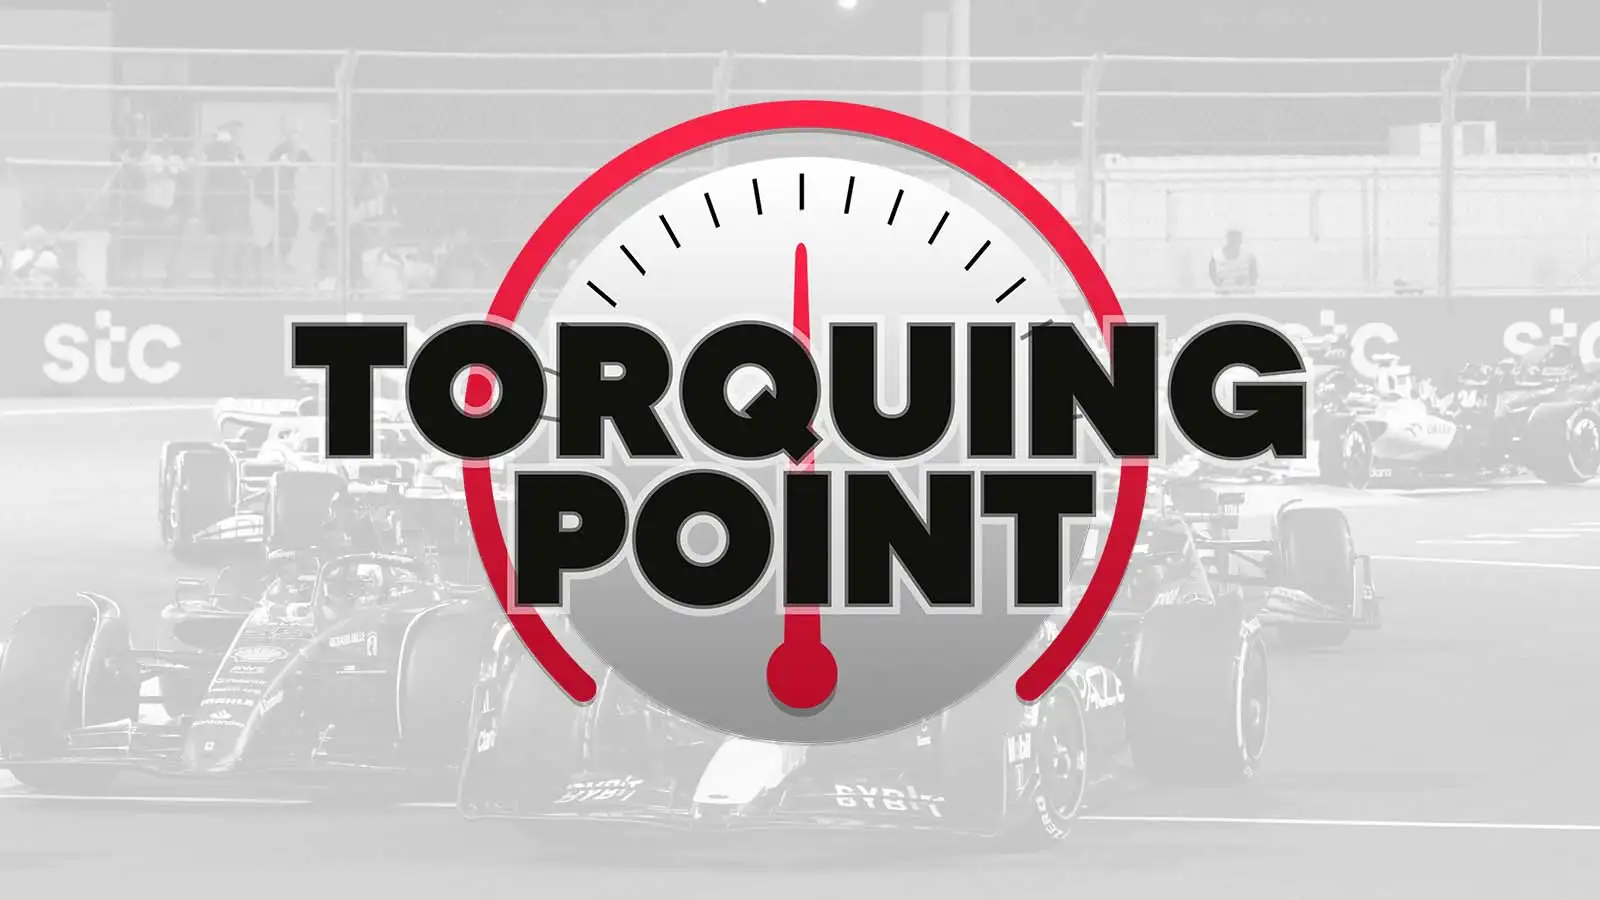 A plain Torquing Point logo. PlanetF1 podcast.